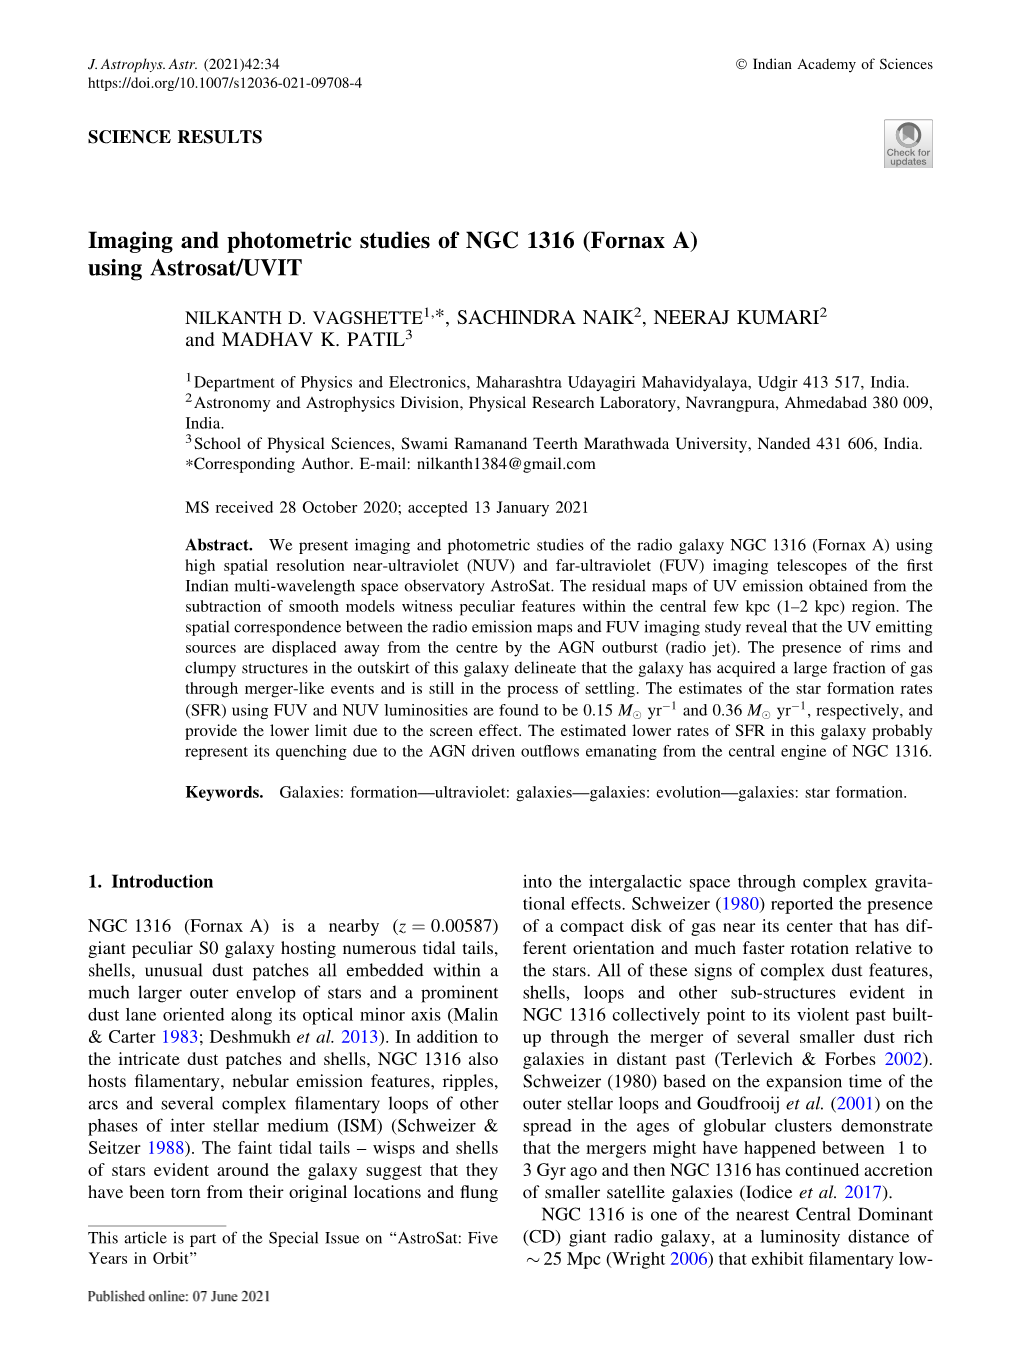 Imaging and Photometric Studies of NGC 1316 (Fornax A) Using Astrosat/UVIT